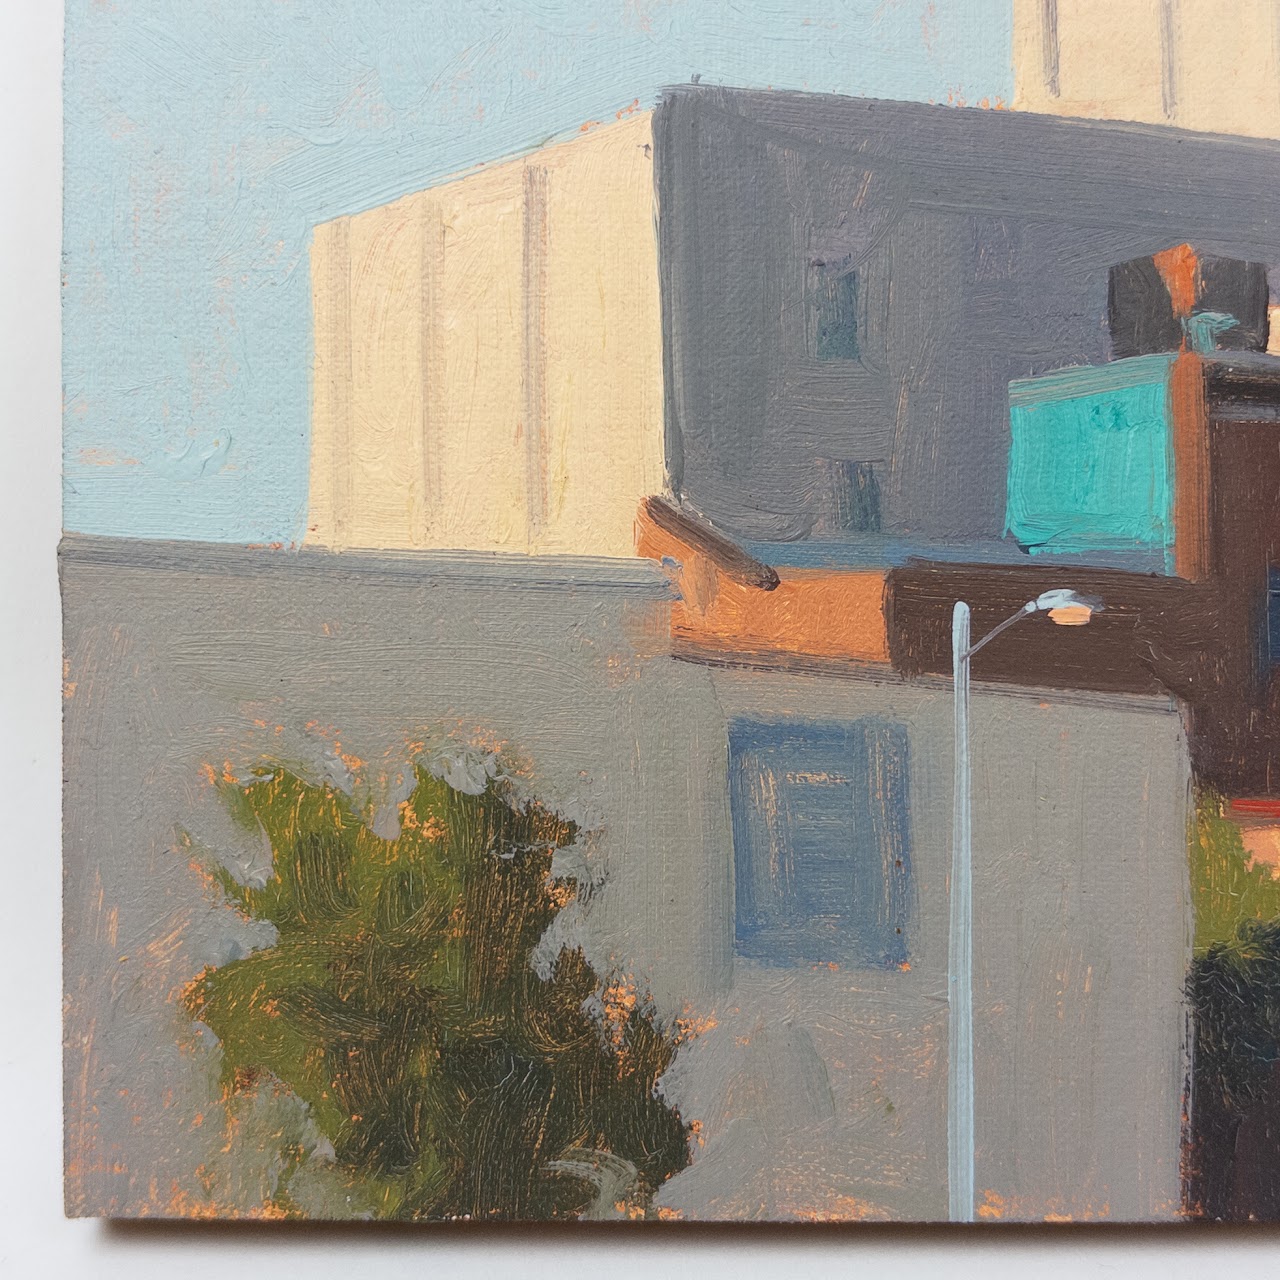 Stephen Magsig "Eastern Market Shadows" Small Painting